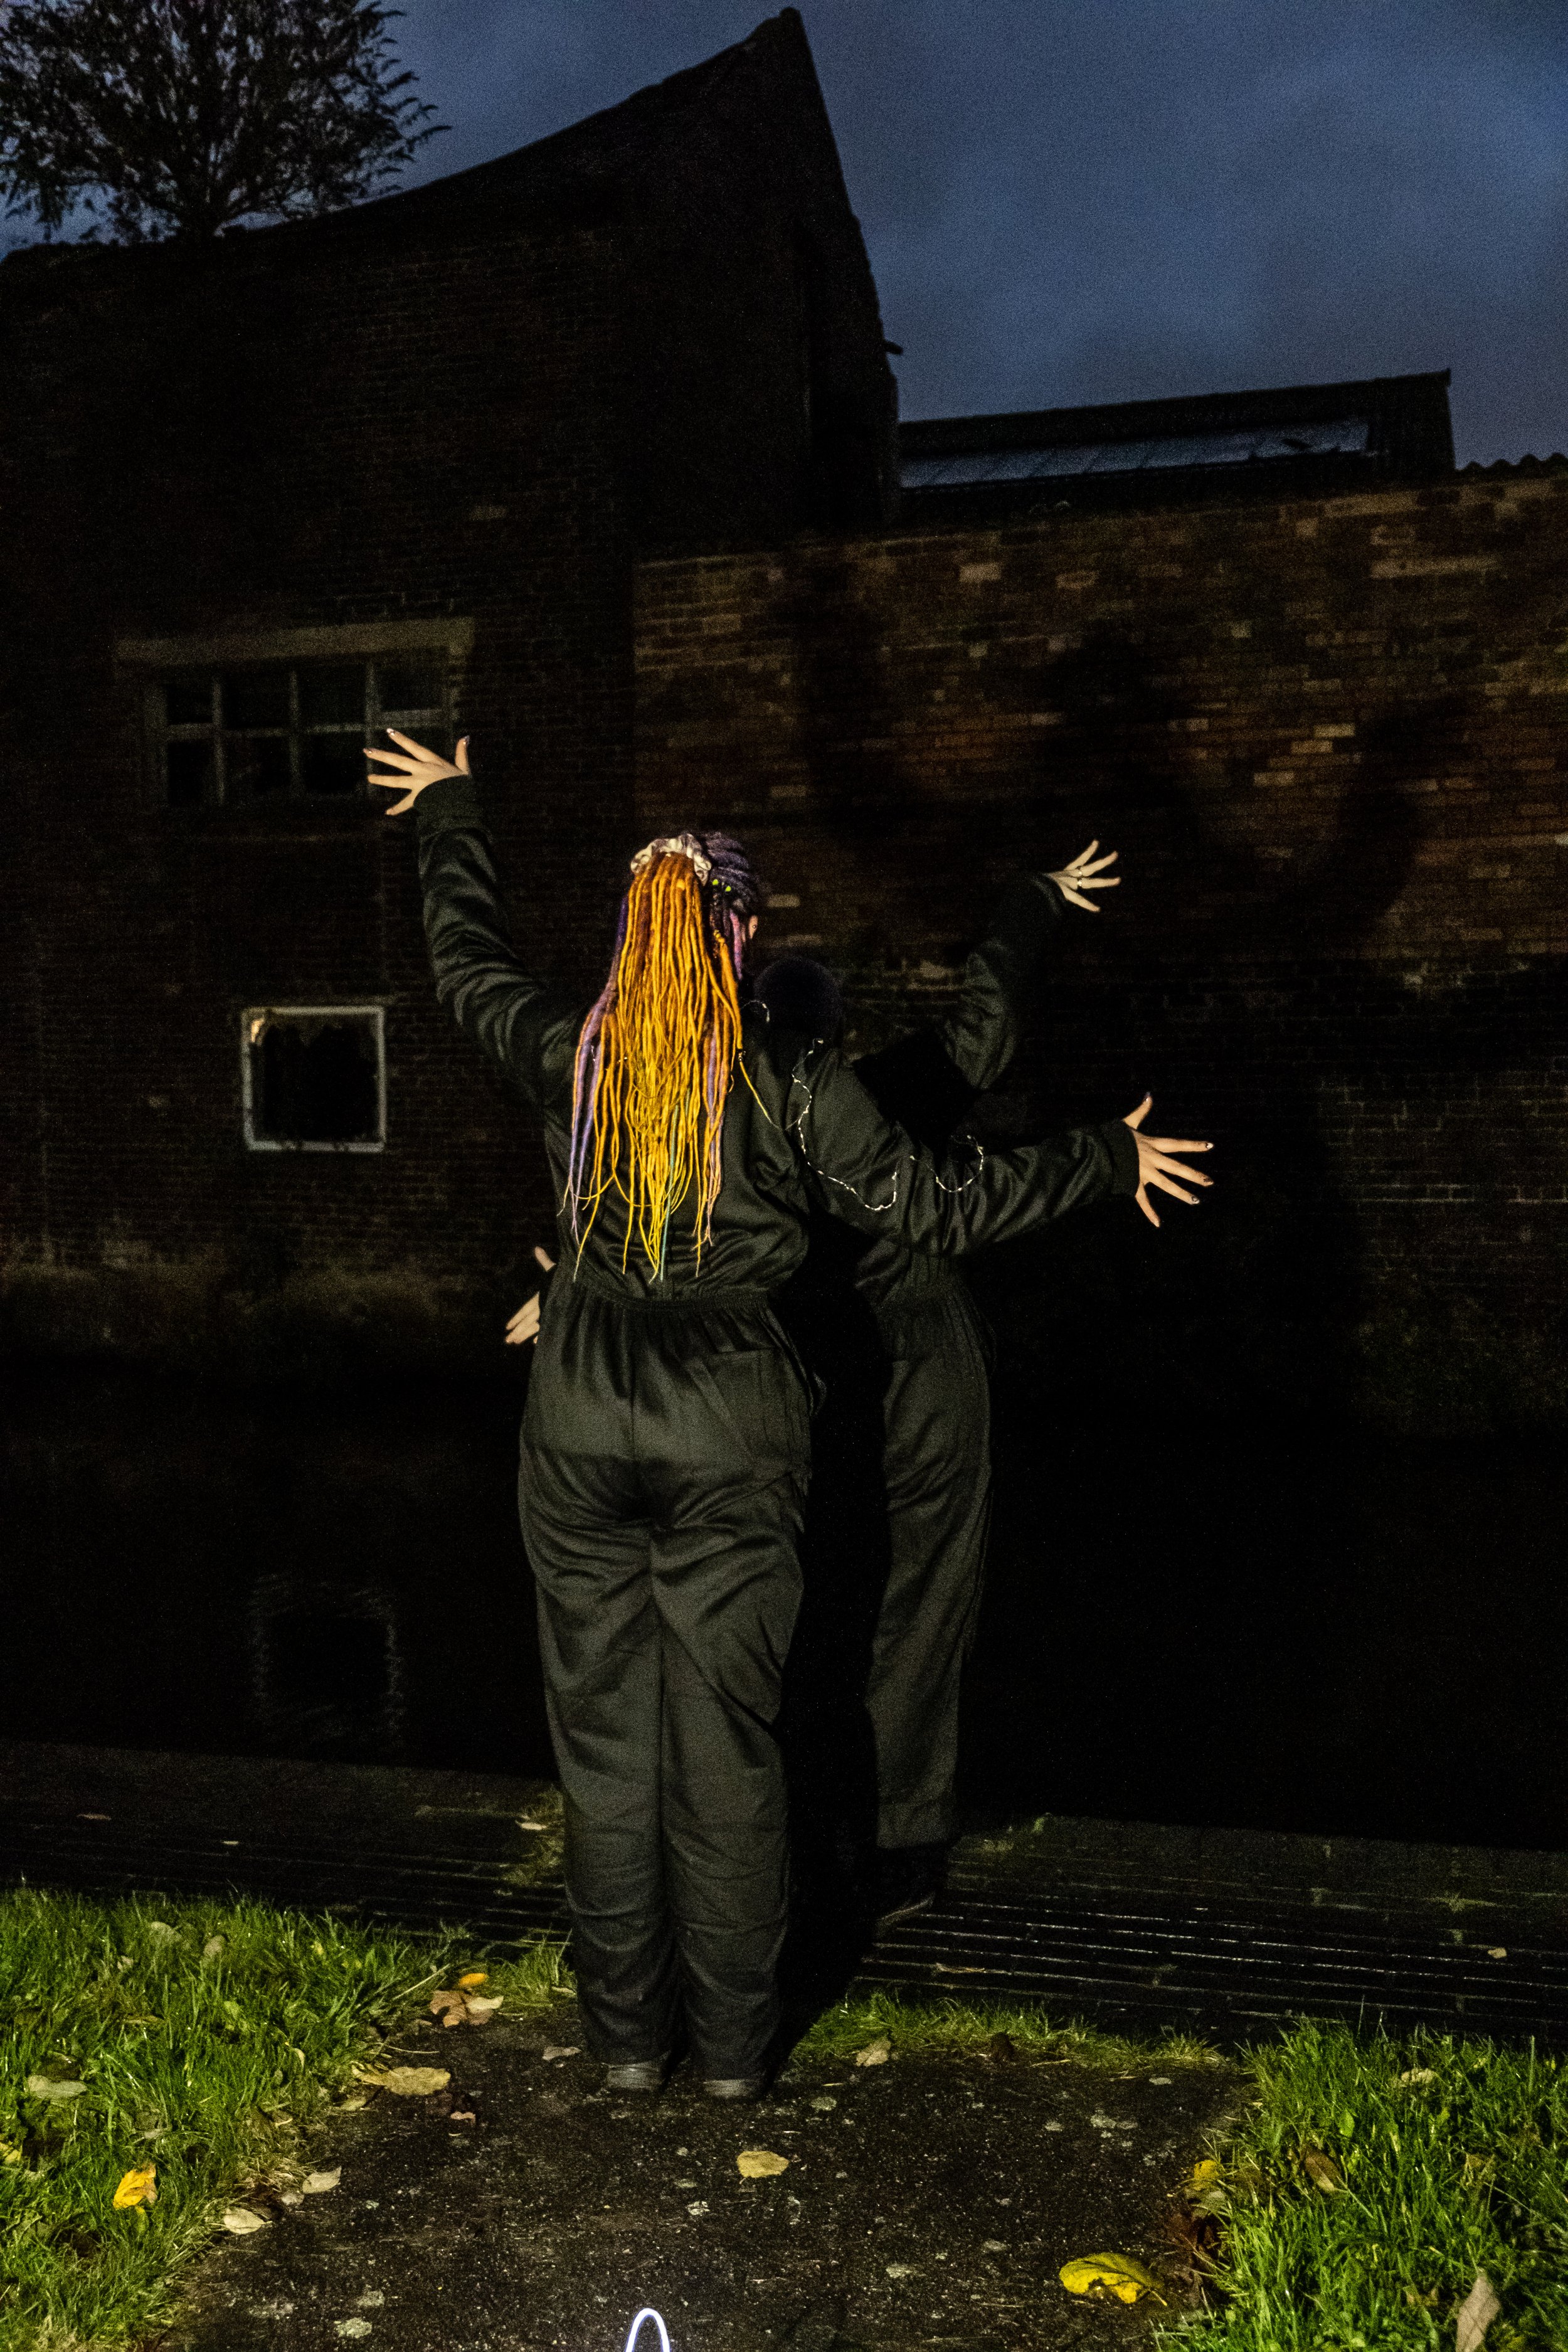 Rails for Trails - 024 0 B arts Lantern Light Night Walk Canal and River Trust Canals Arts Council England Stoke on Trent Art Performance Community Arts Longport Station to Westport Lake Route Jessica Simm Hannah Walton Shadow Play .jpg